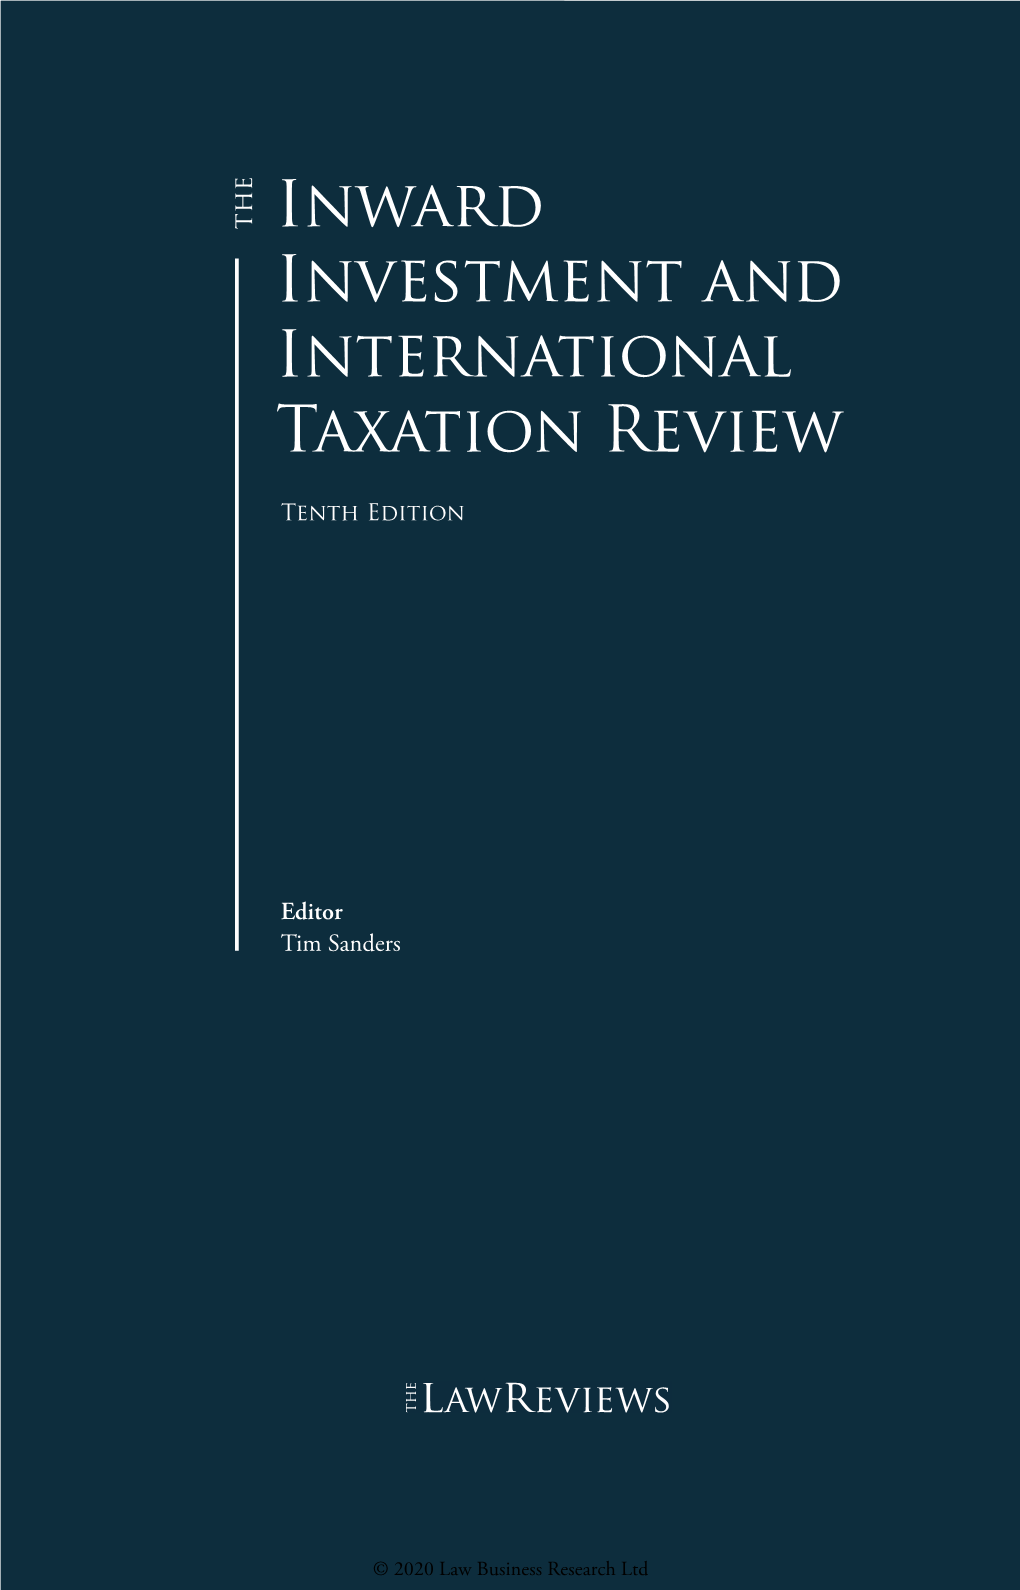 Inward Investment and International Taxation Review